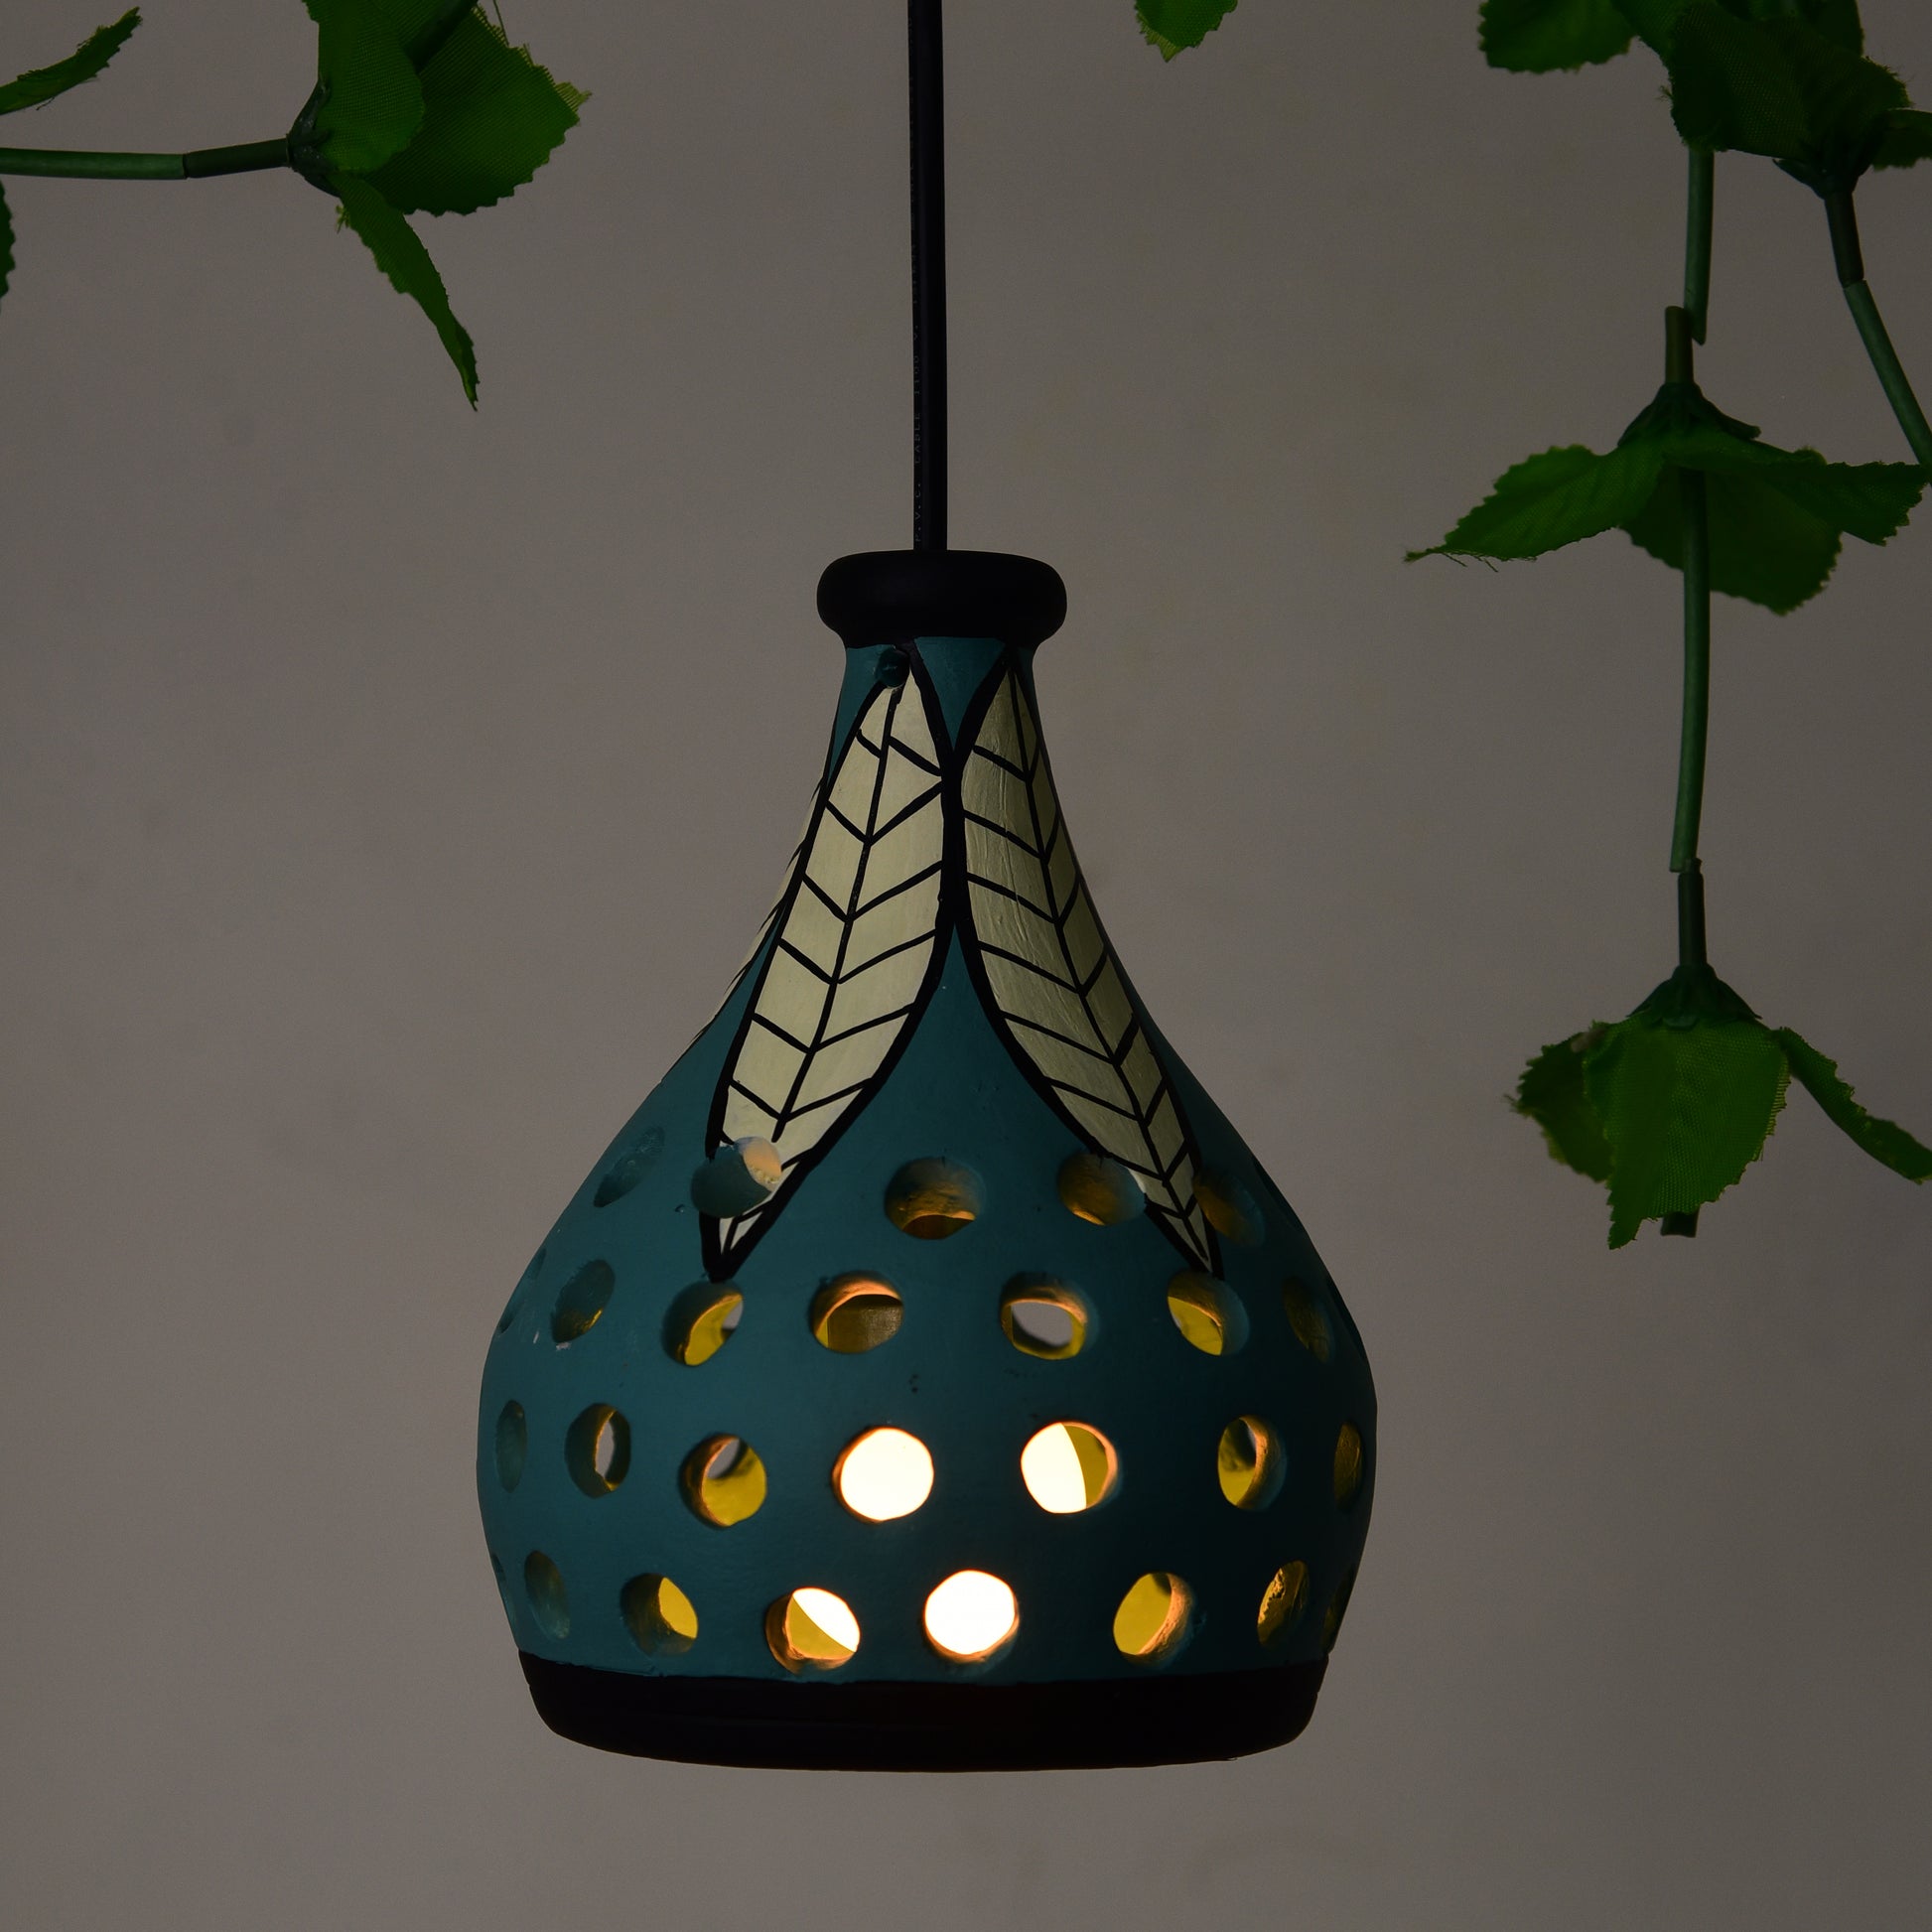 "Ethnic Lantern" Terracotta Handcrafted Hanging Lamp In Blue Color